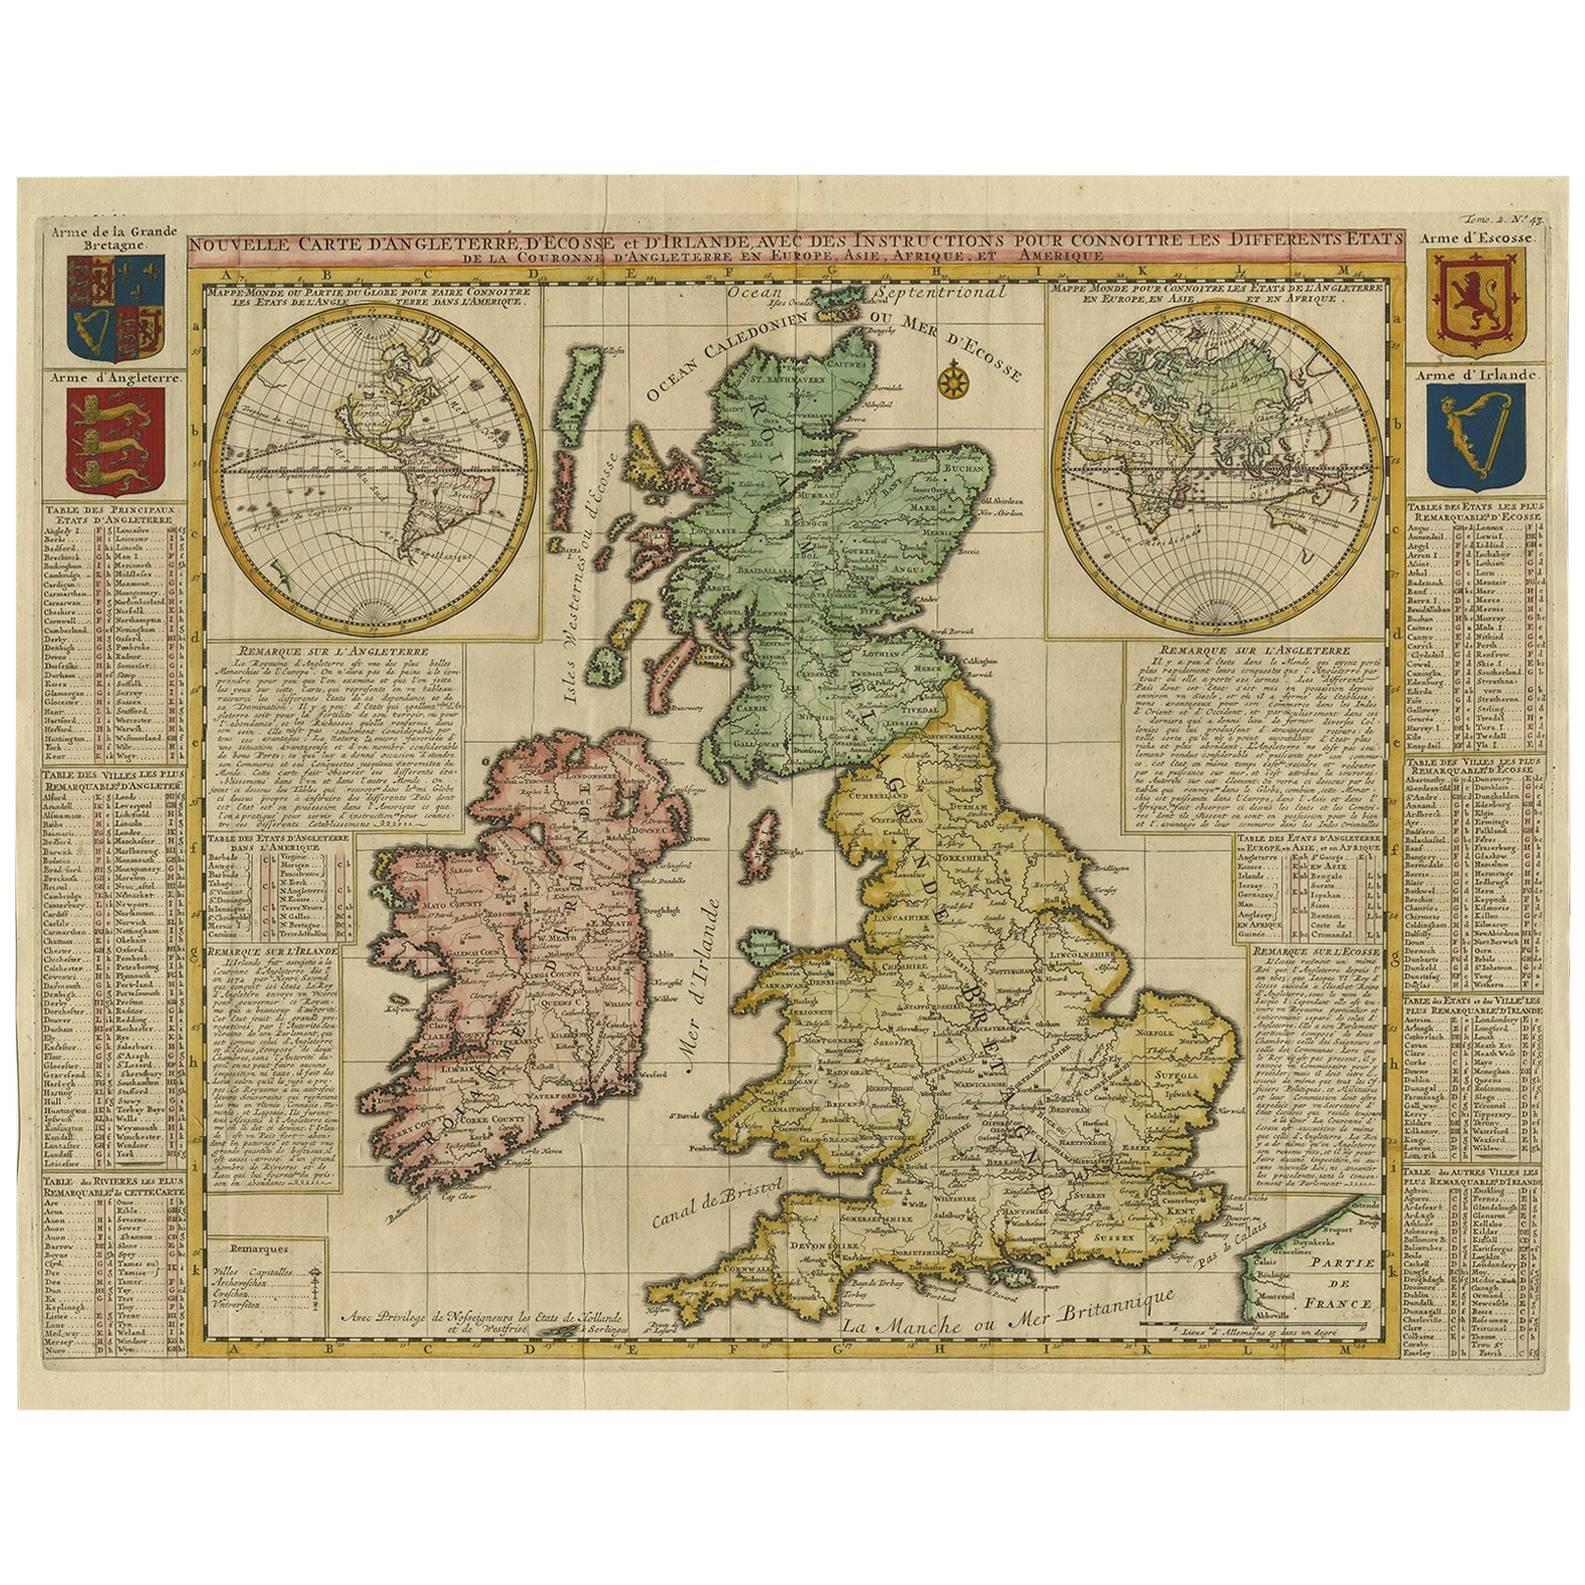 Antique Map of the British Isles by H. Chatelain, 1719